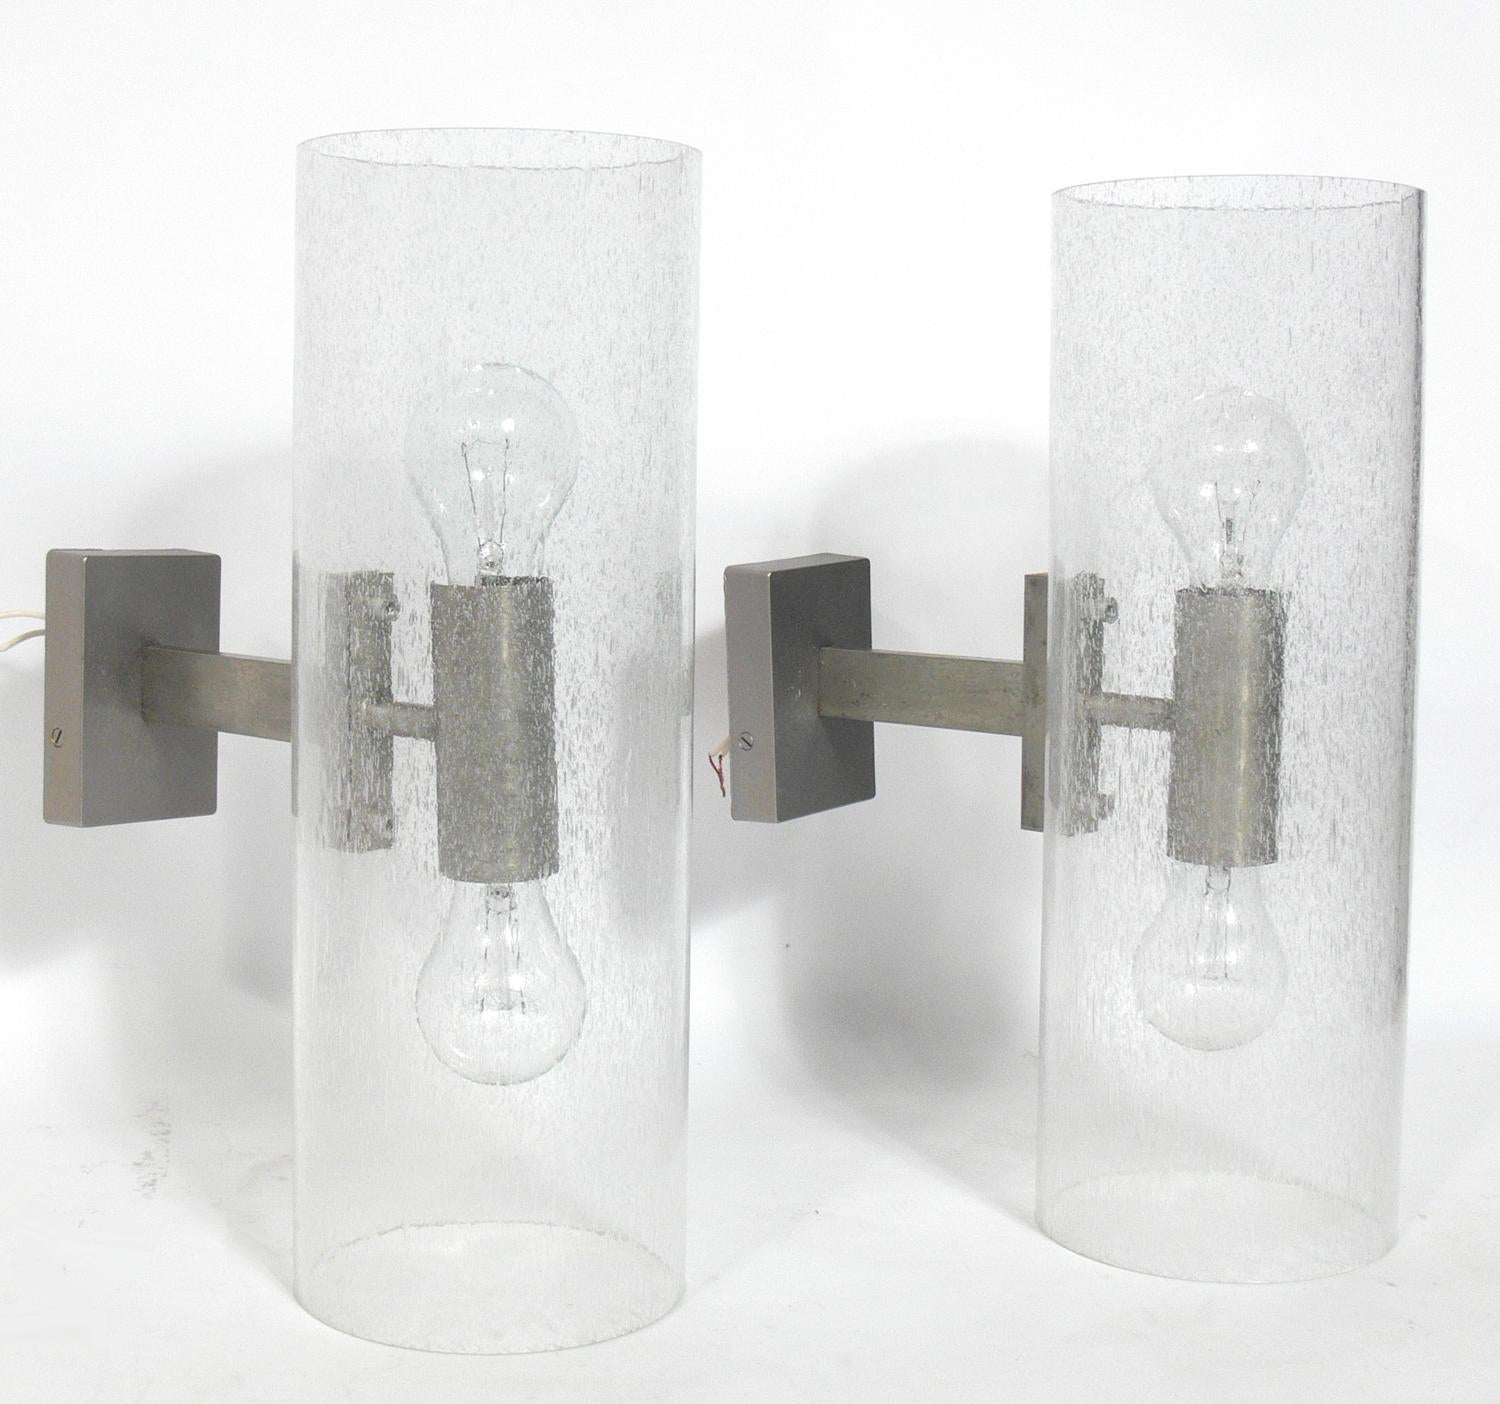 Pair of Italian sconces in controlled bubble glass and silvered metal, Italy, circa 1960s. They give off a warm light when lit. Rewired and ready to mount.